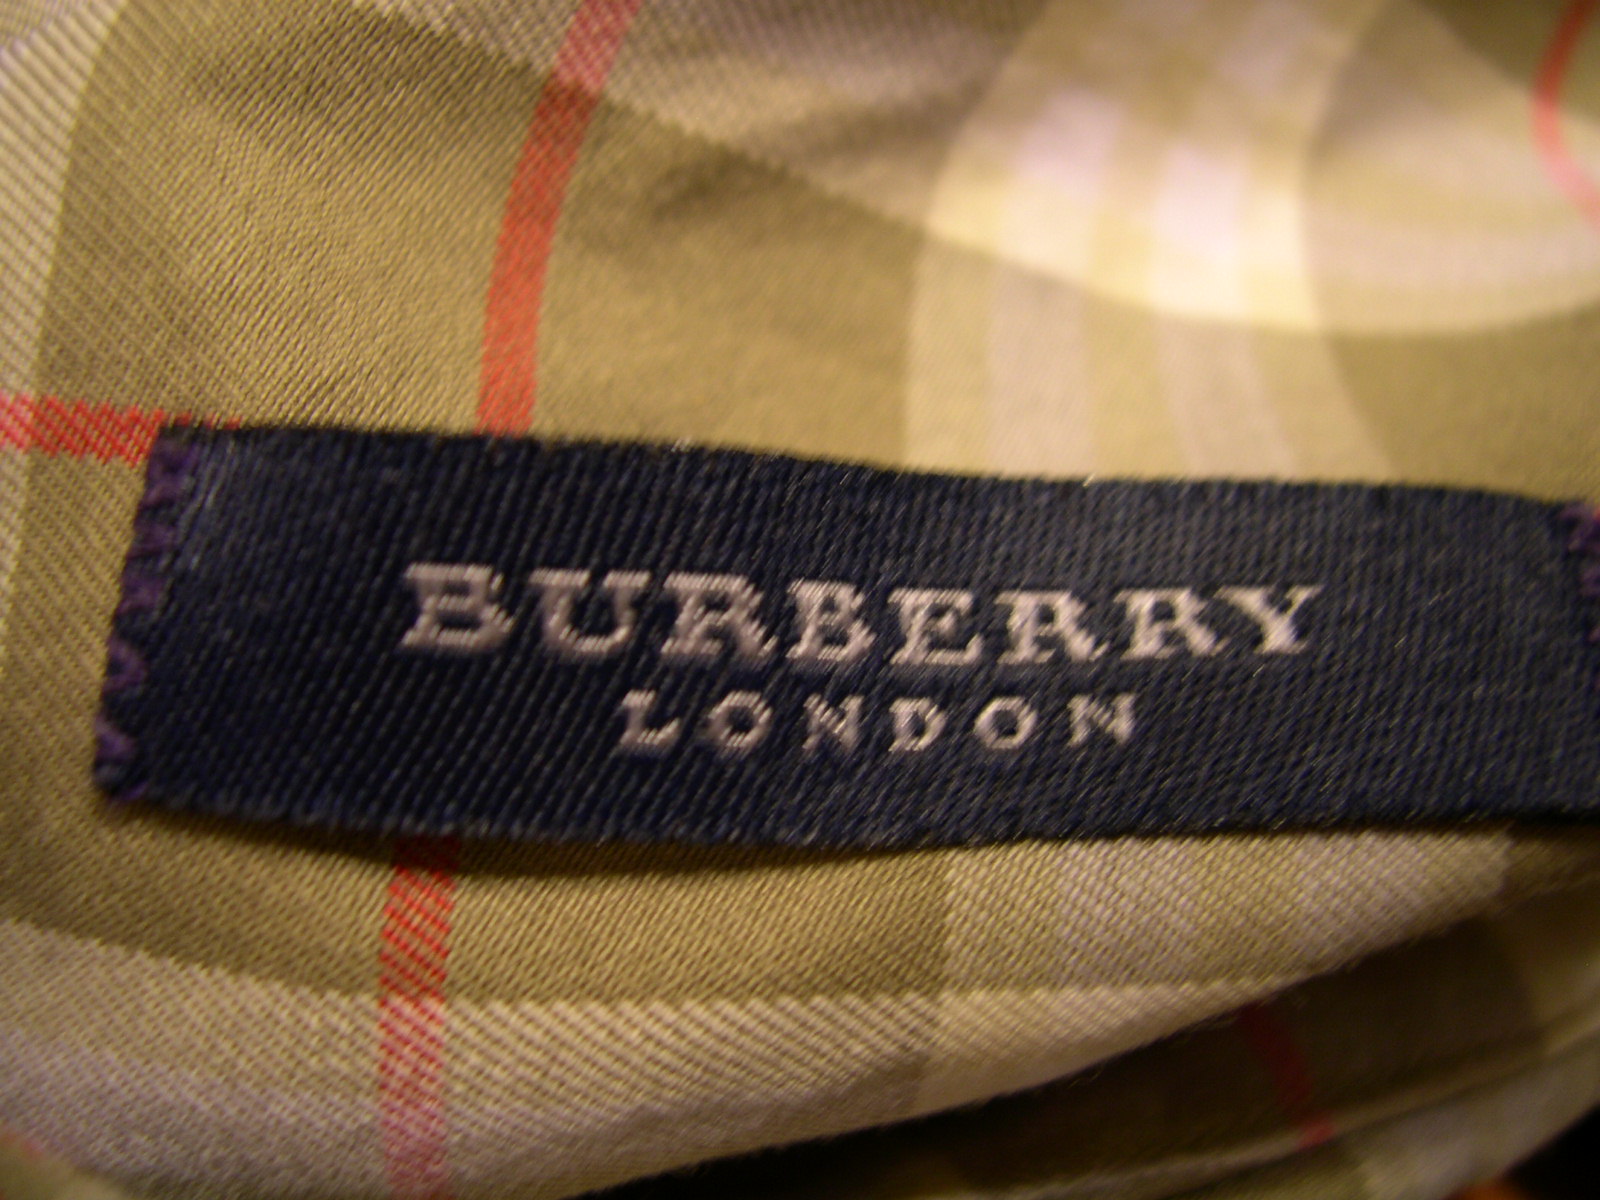 burberry made in london tag